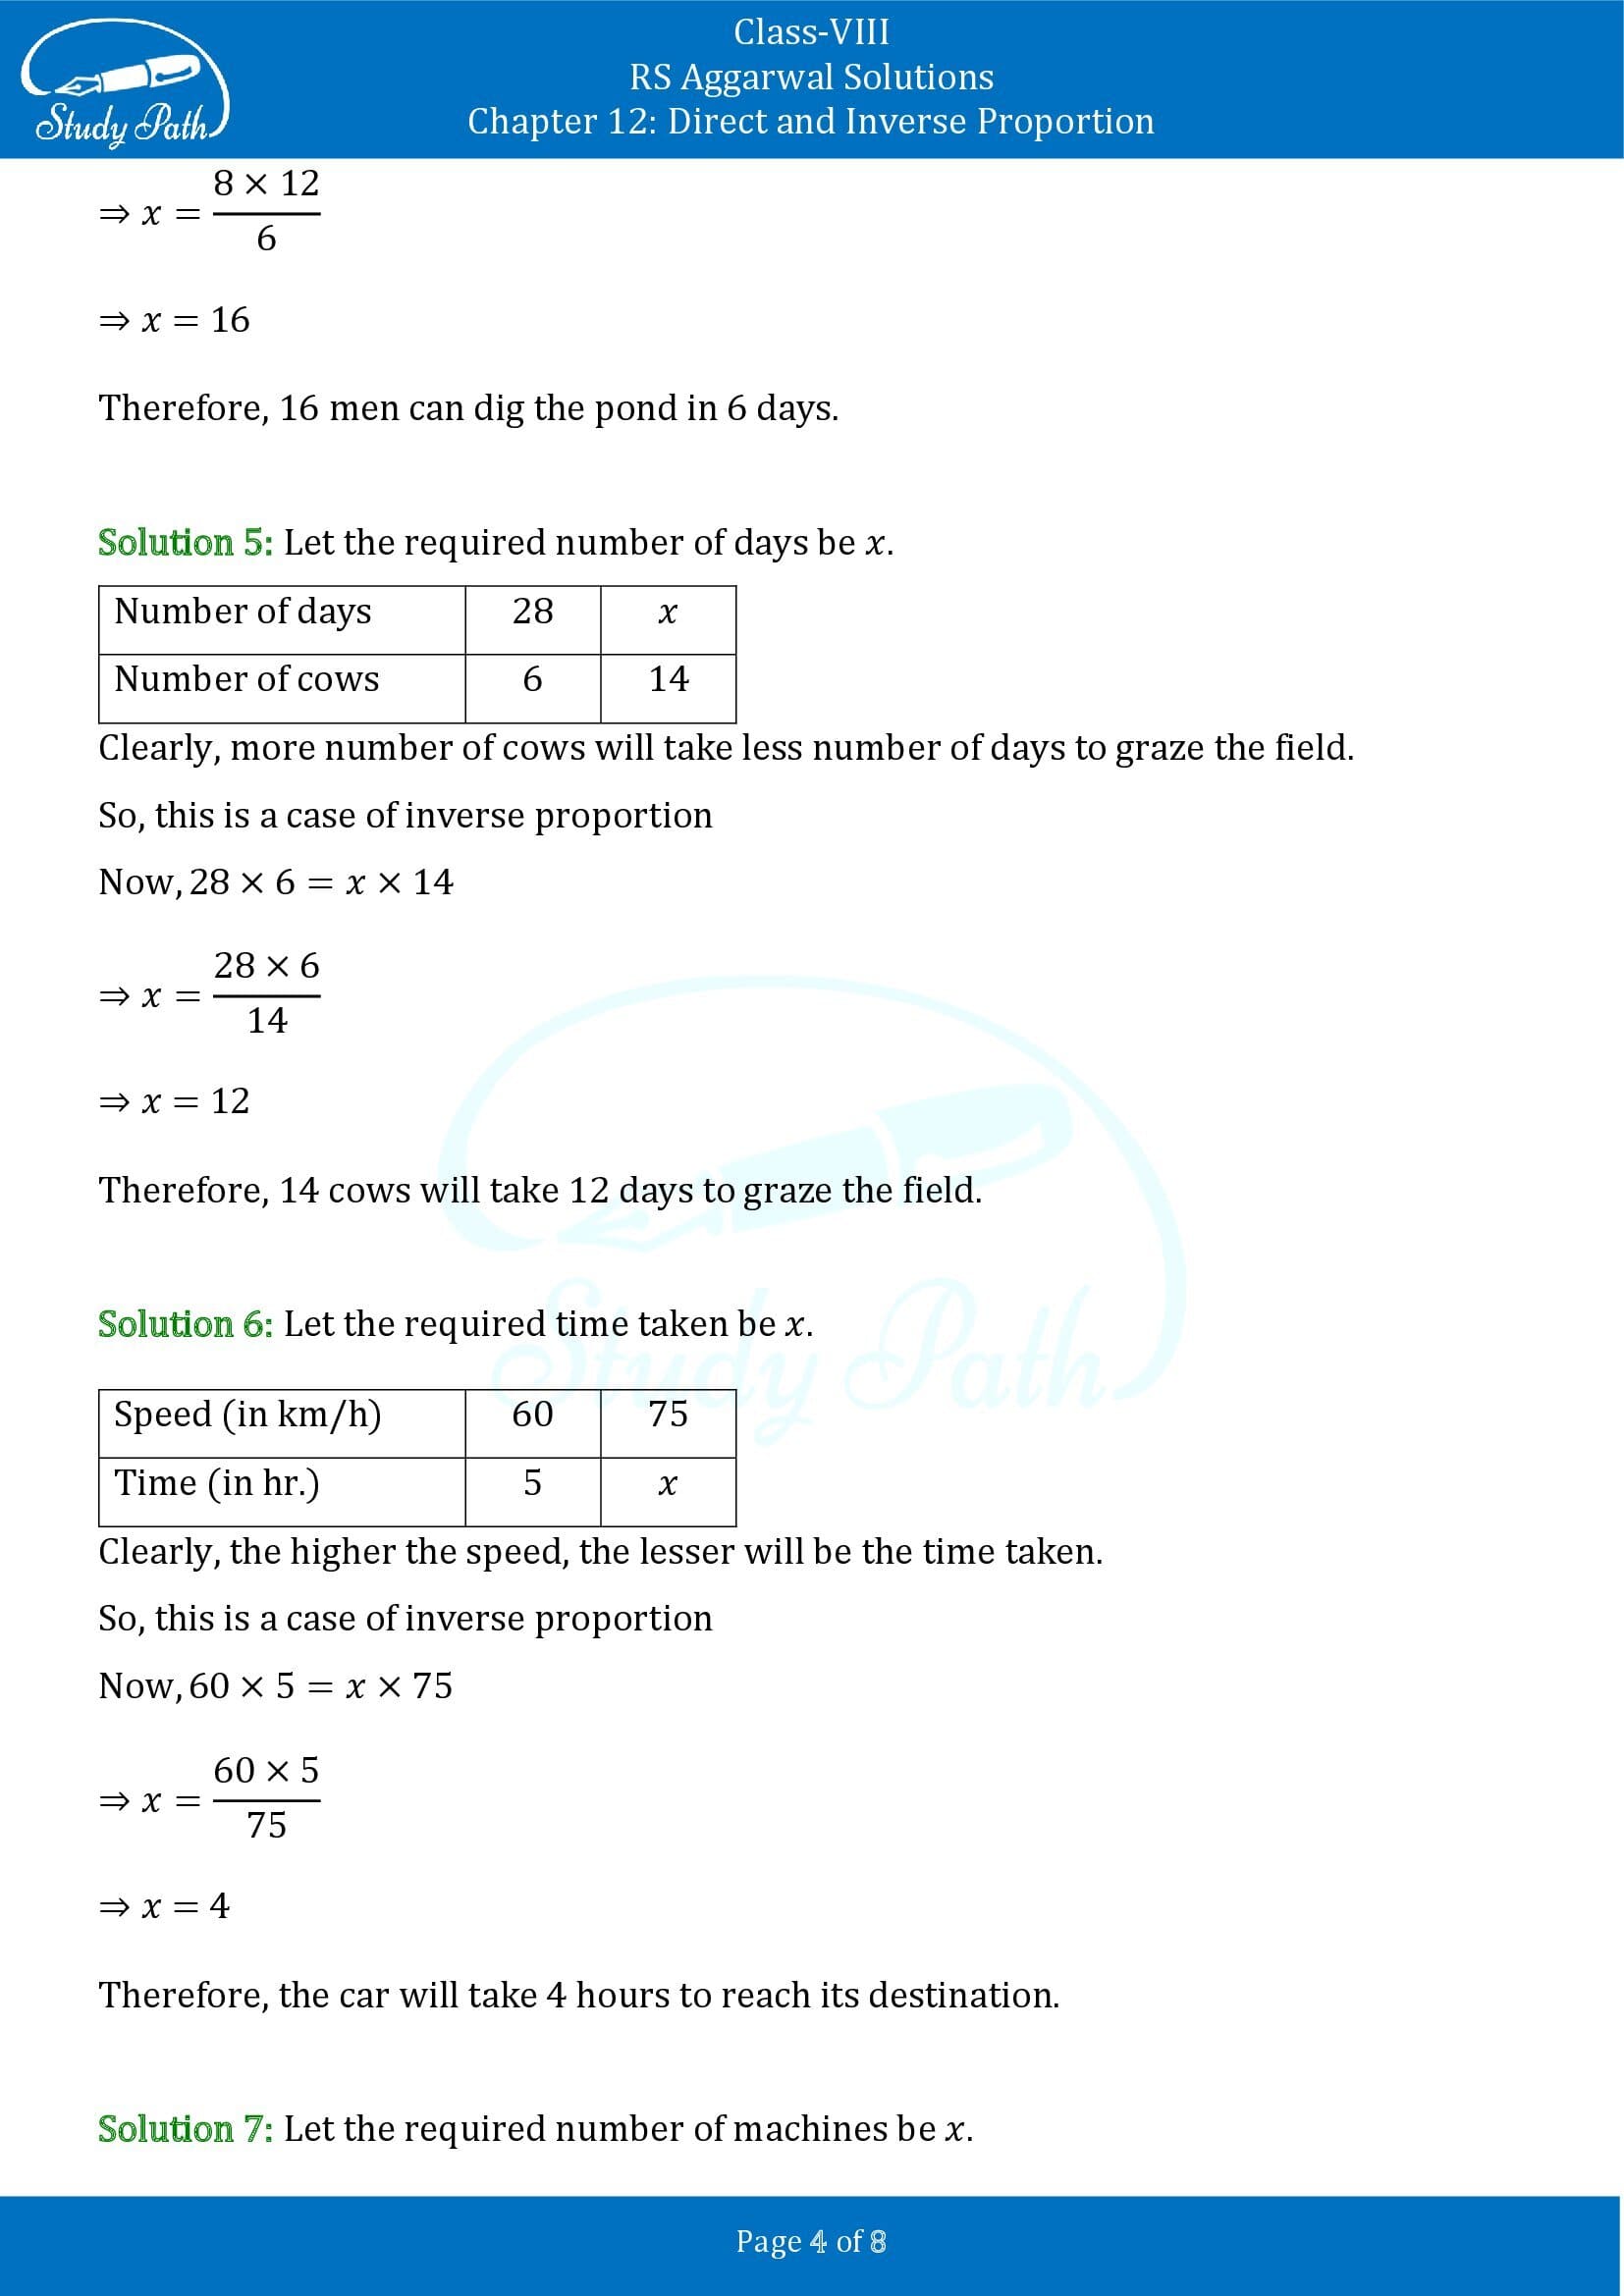 RS Aggarwal Solutions Class 8 Chapter 12 Direct and Inverse Proportion Exercise 12B 00004